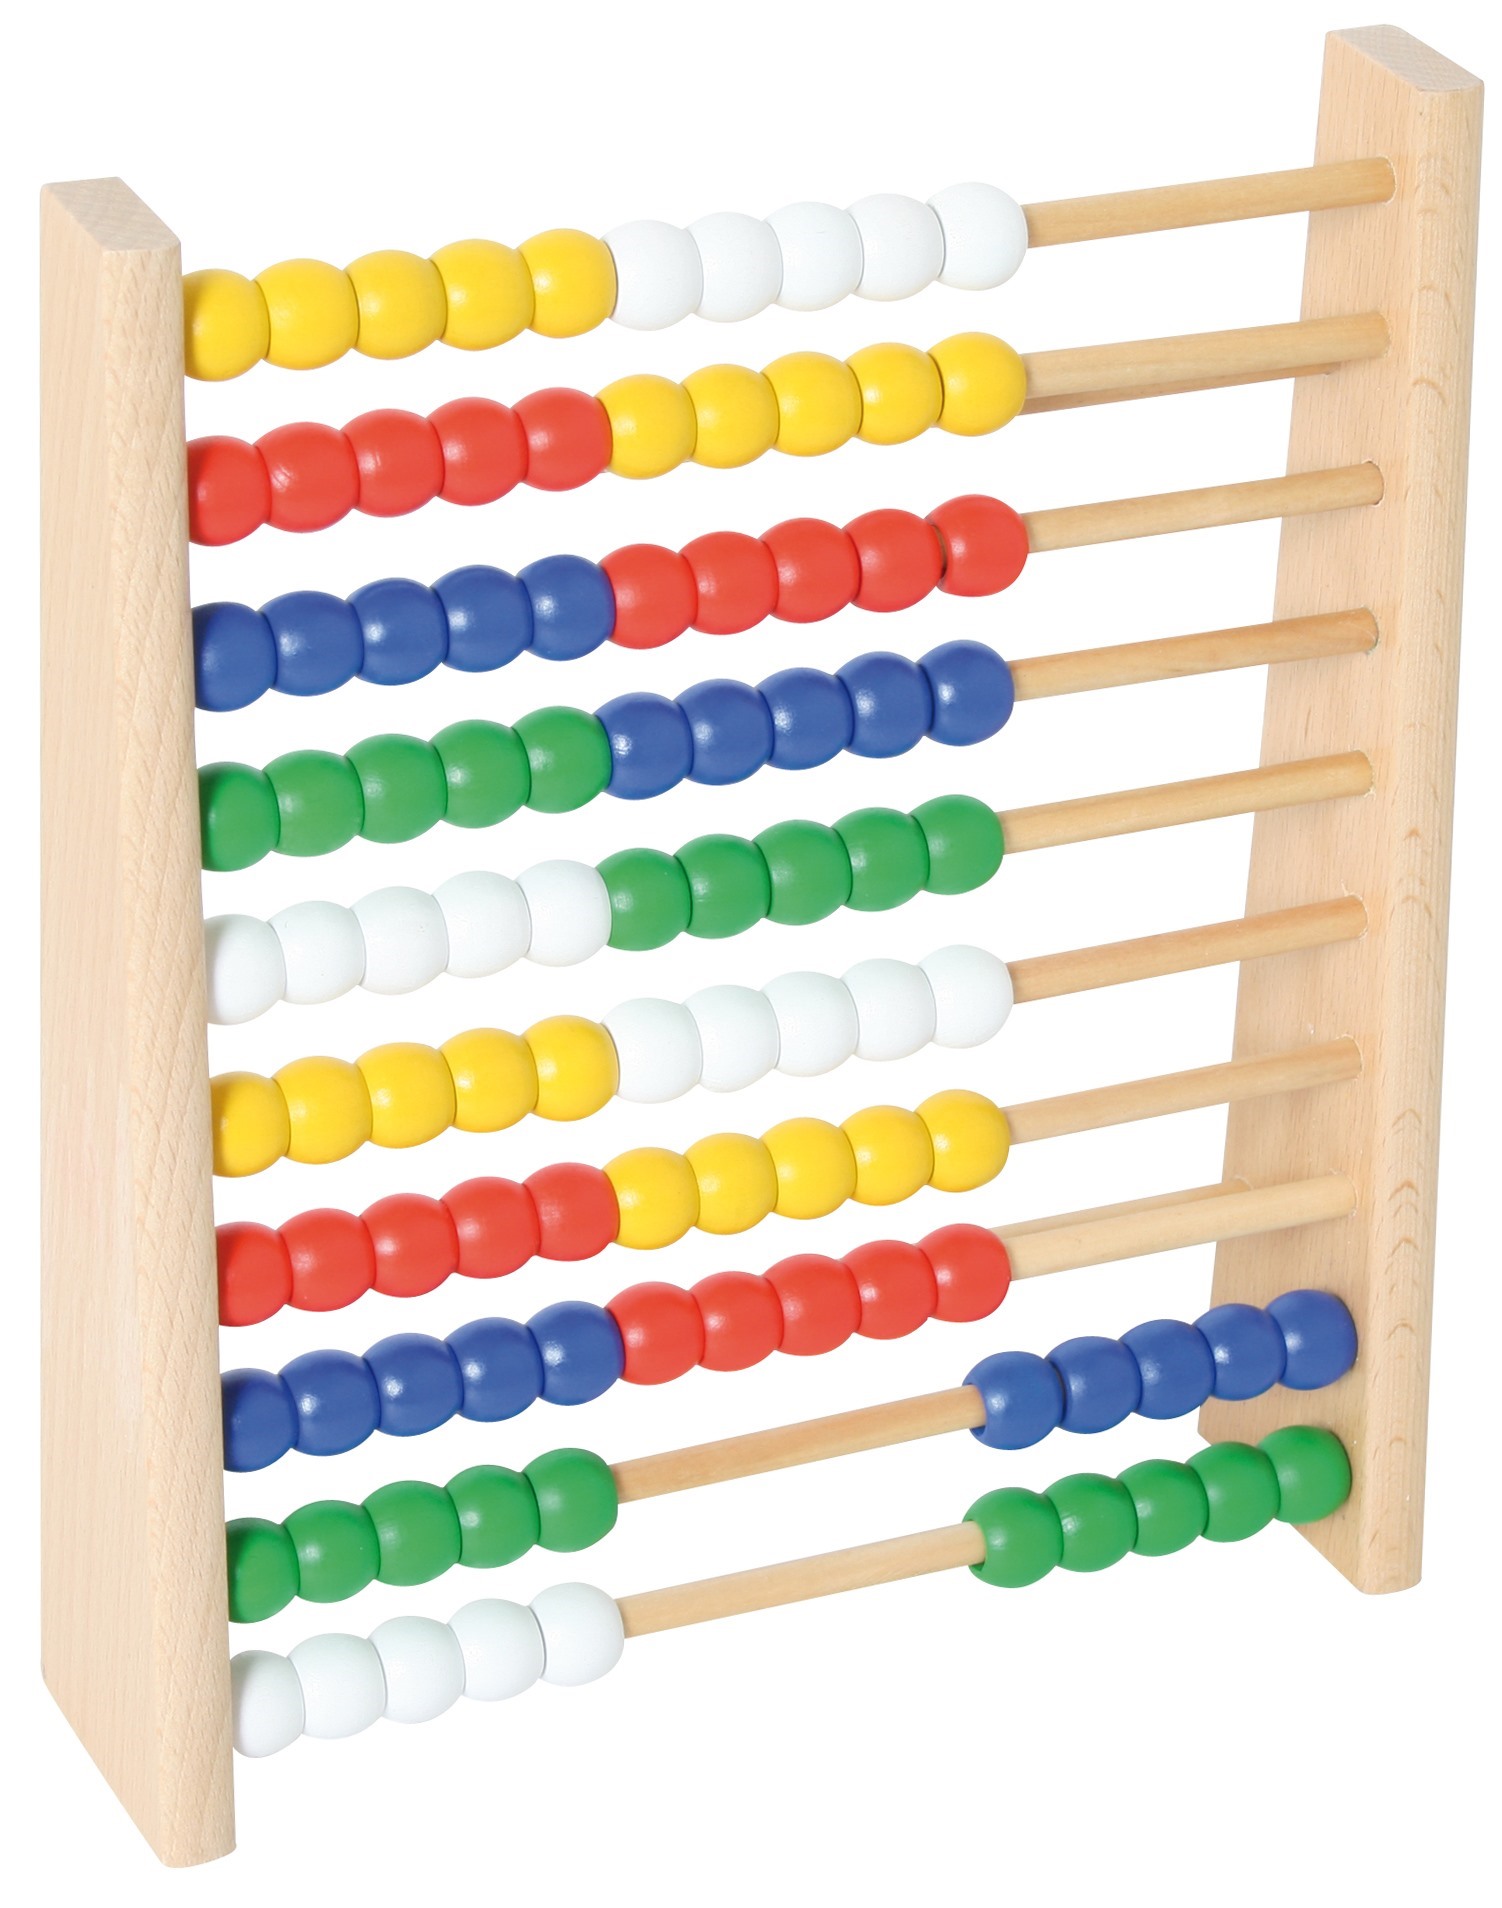 20 x 25 x 5 cm wooden abacus